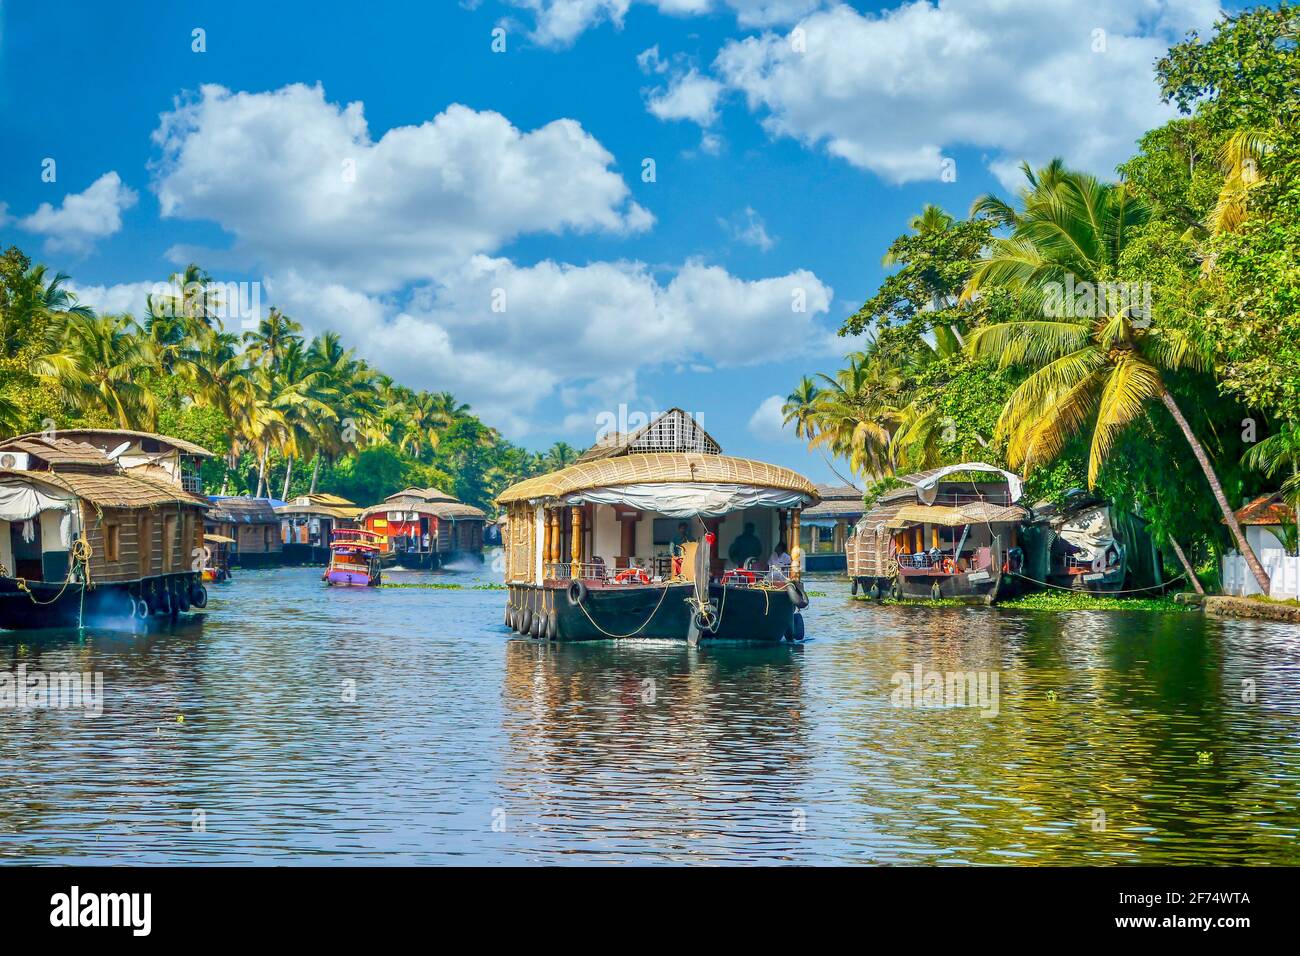 In the peaceful backwaters of the southern state of Kerala, India, covered barges travel along a narrow canal lined with coconut palm trees. Stock Photo